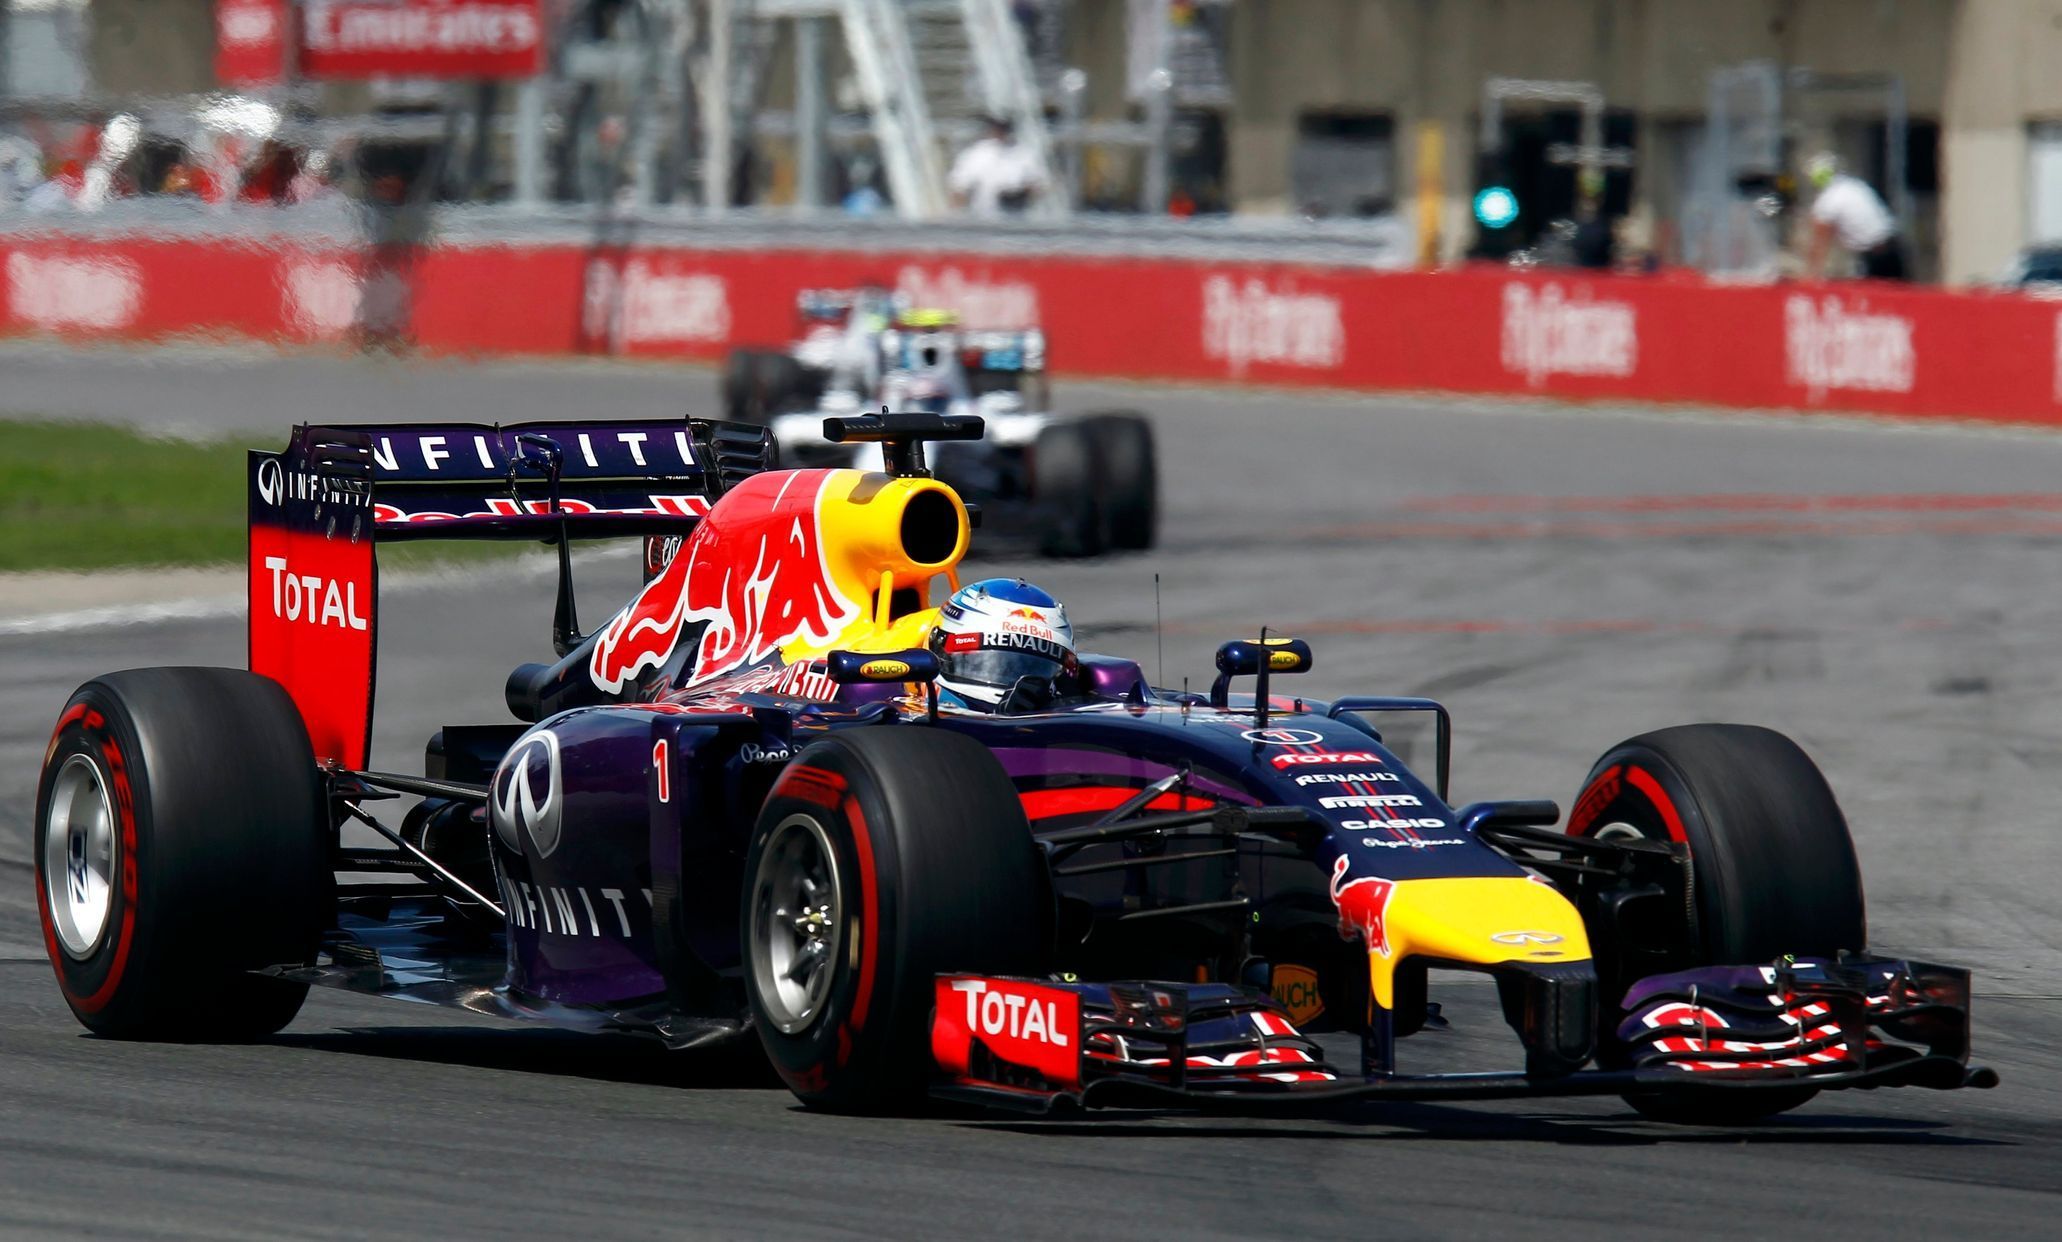 Red Bull Formula One driver Vettel of Germany drives during the Canadian F1 Grand Prix at the Circuit Gilles Villeneuve in Montreal